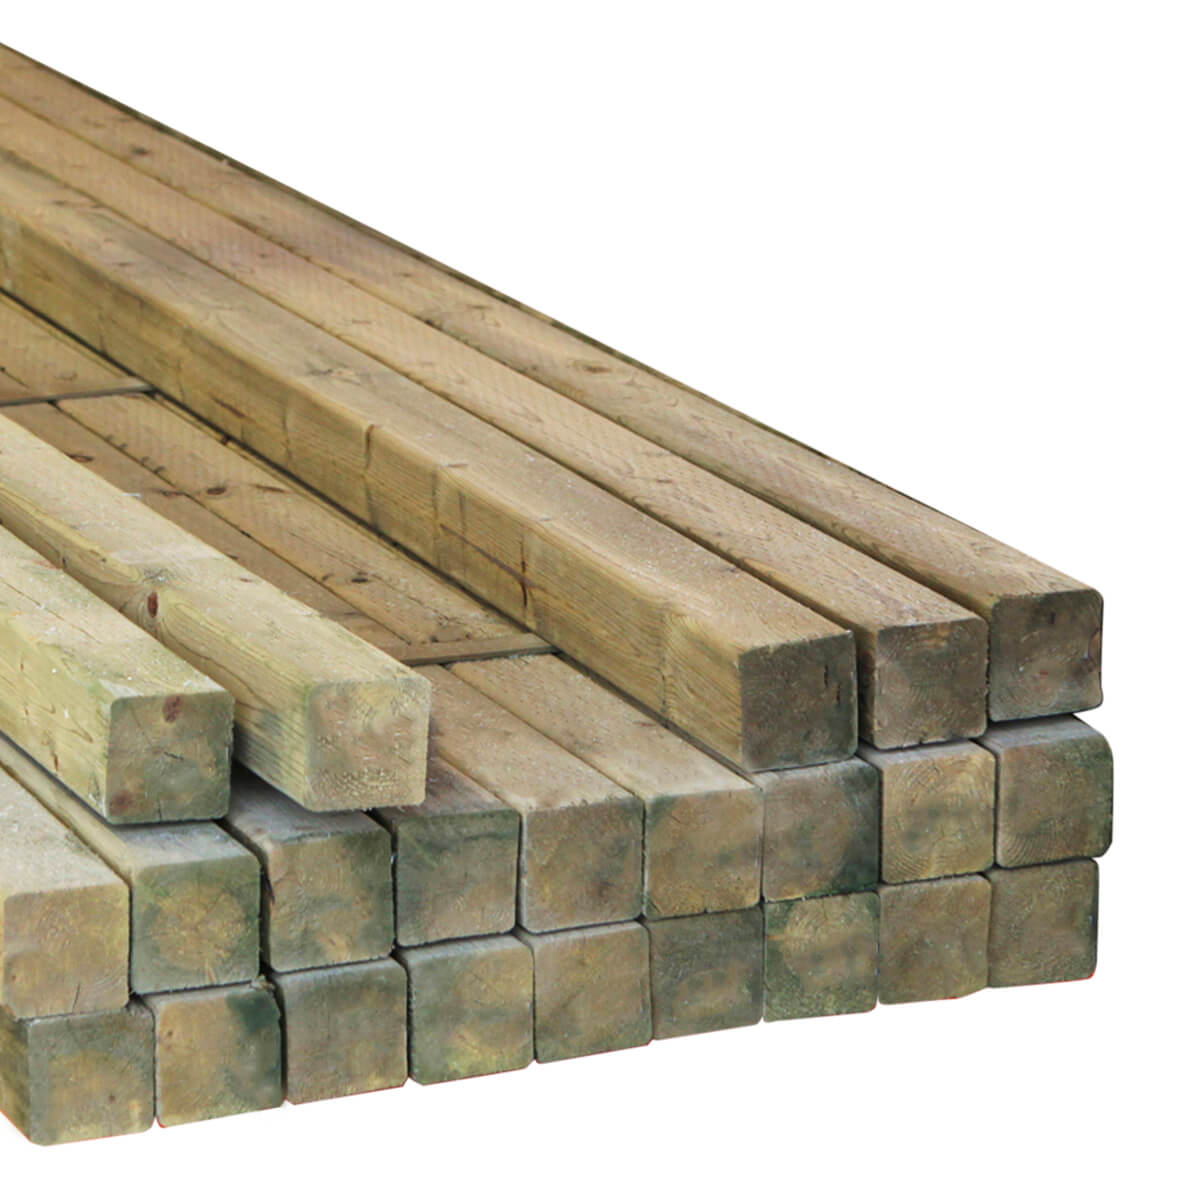 4X6X20-ft - Rough CCA Treated Timbers